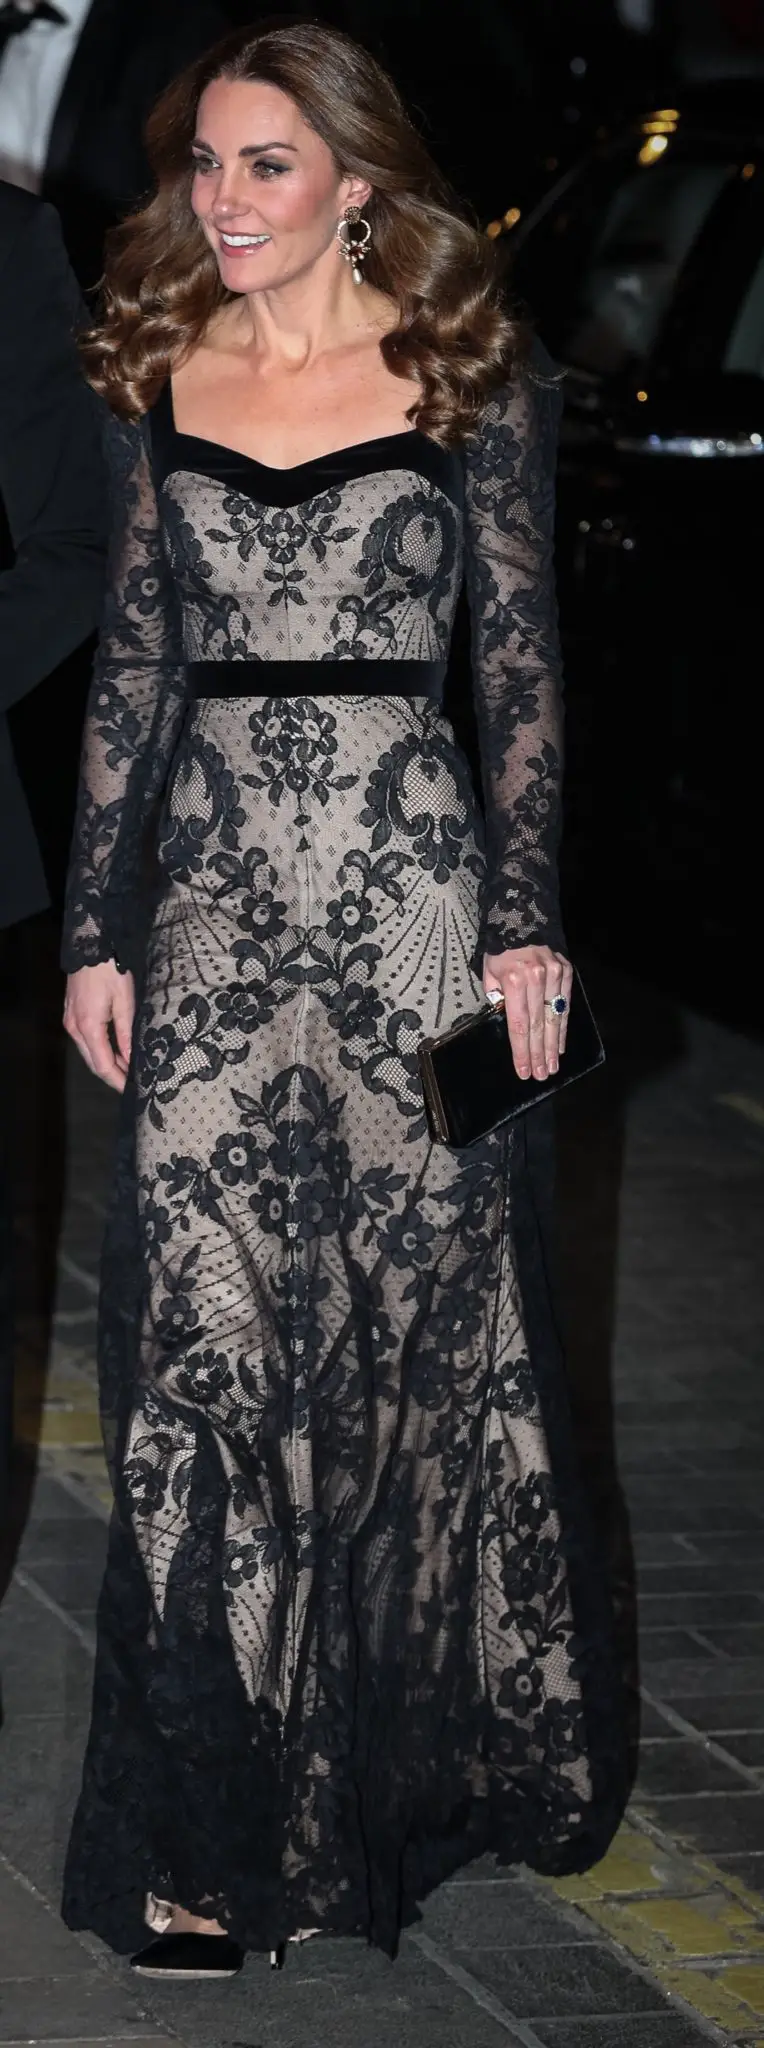 The Duhess of Cambridge wore black Alexander McQueen Lace gown with Erdem earrings and Jimmy Choo Pumps at Royal Variety Performance